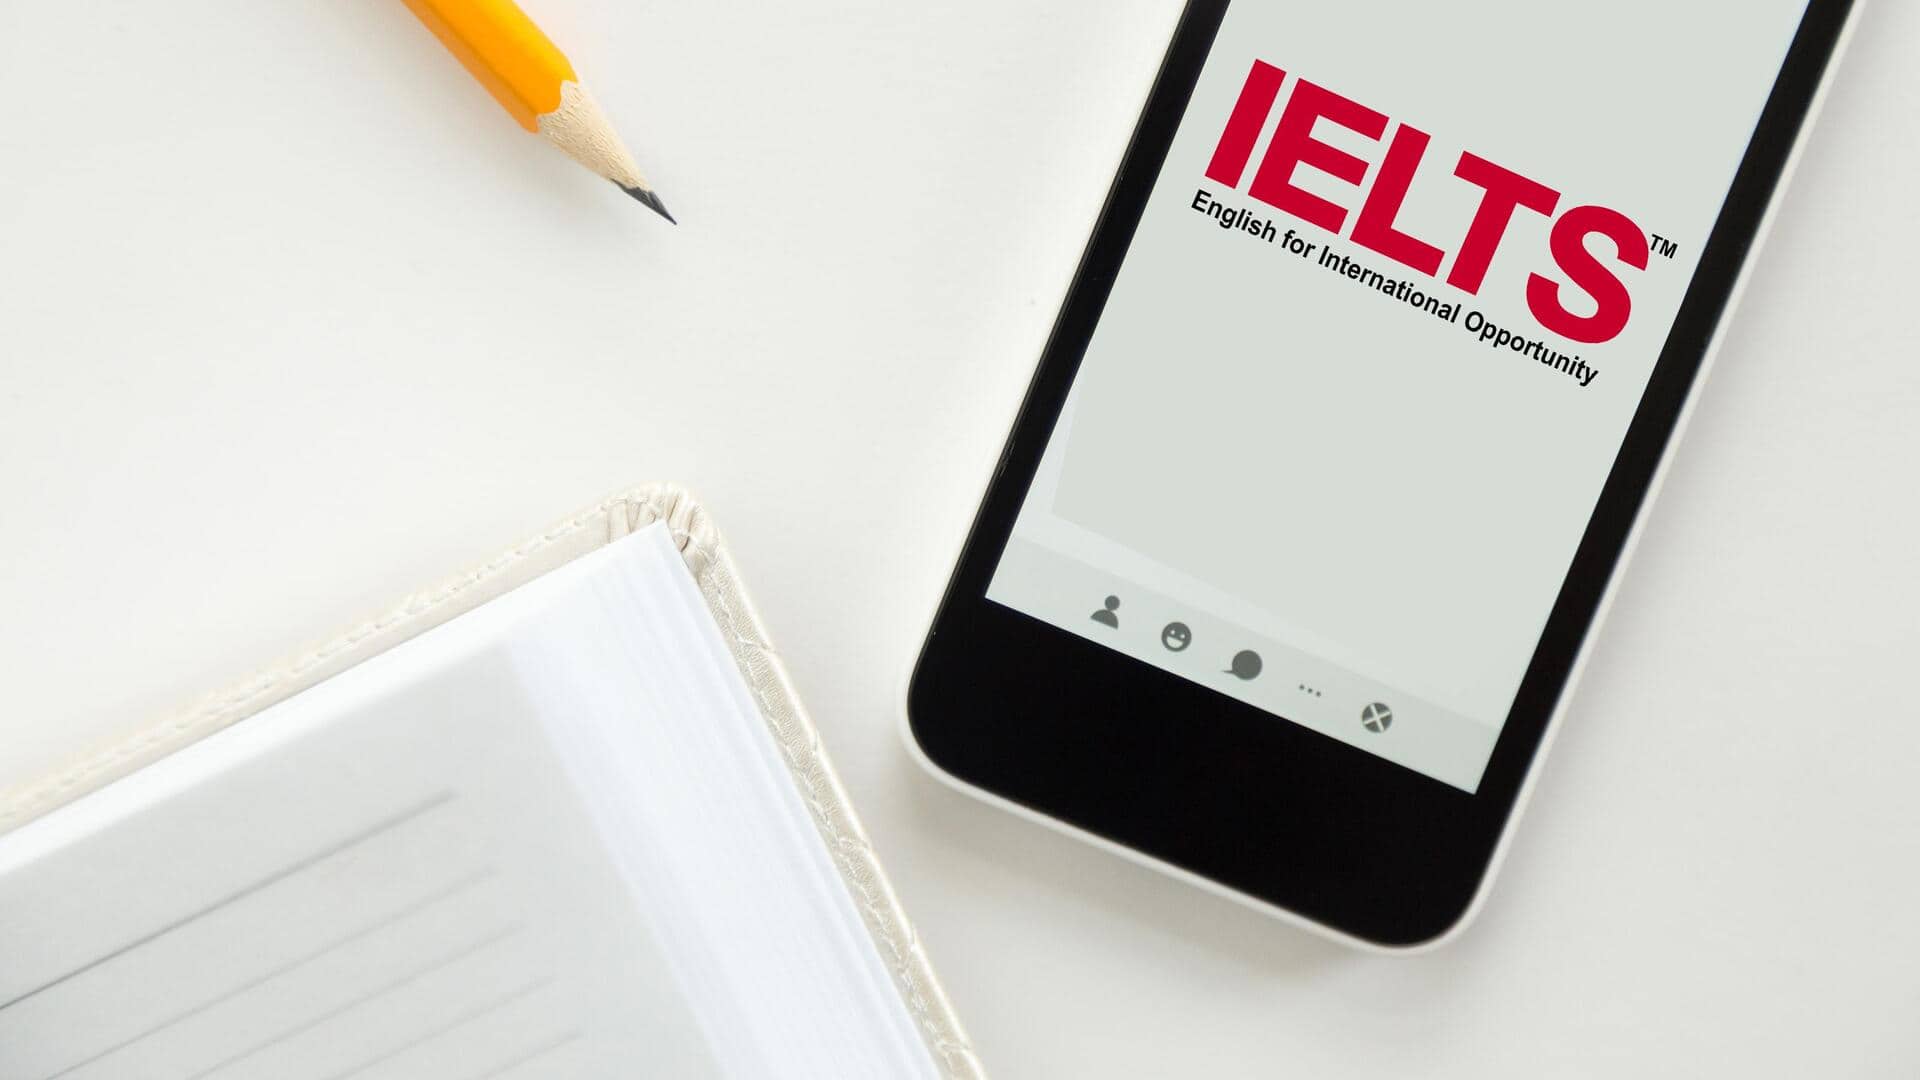 #CareerBytes: Preparing for IELTS? Download these 5 mobile apps